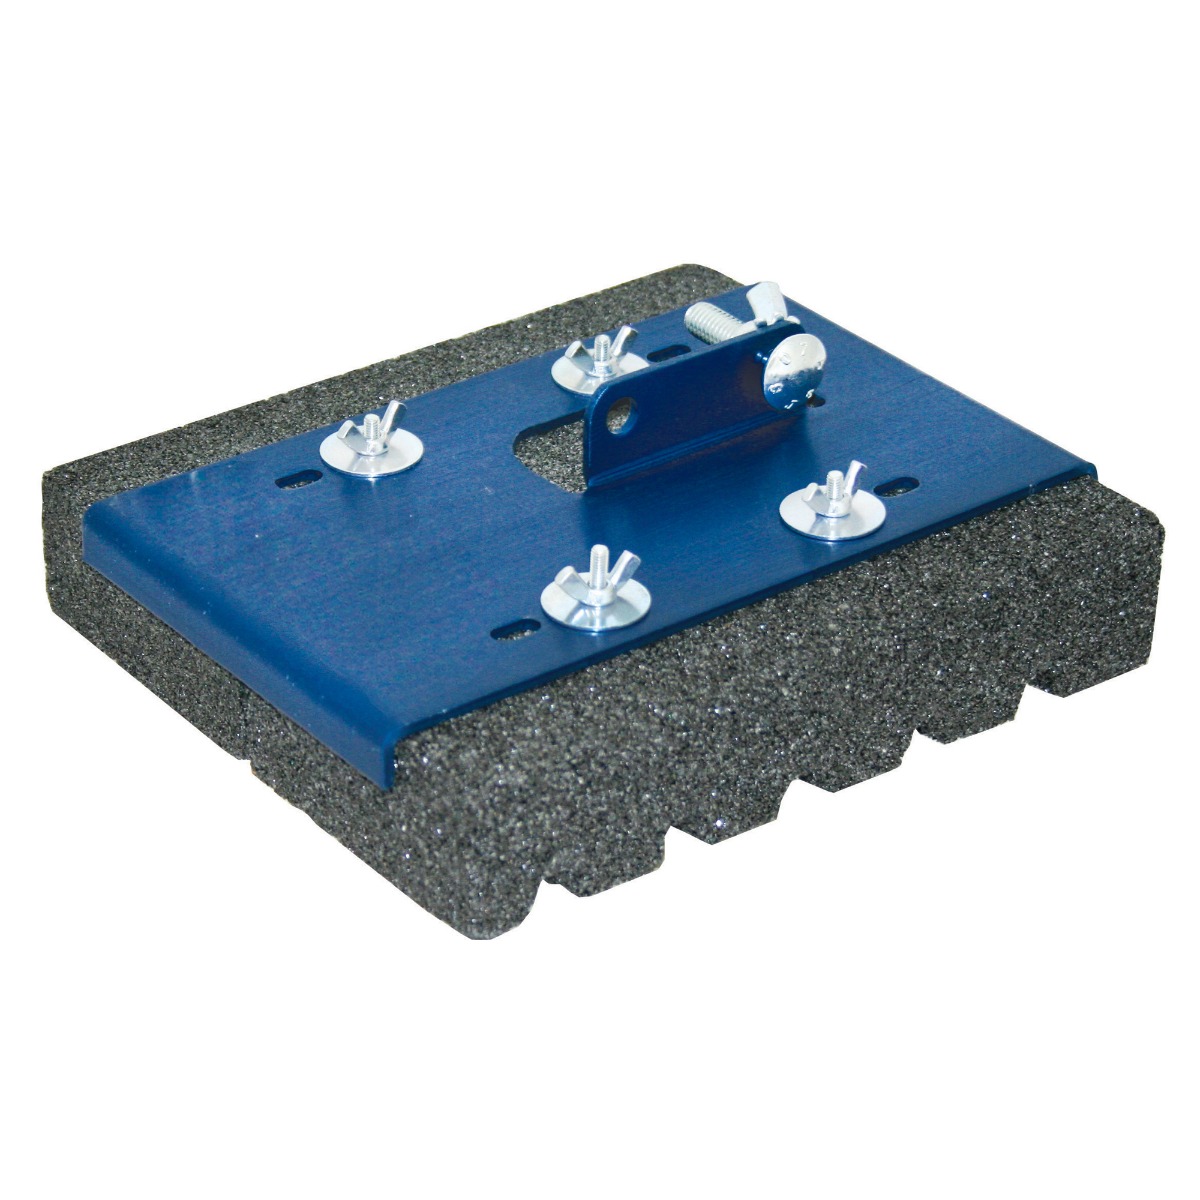 8" x 7" Rub Brick Mop without Handle - 20 Grit